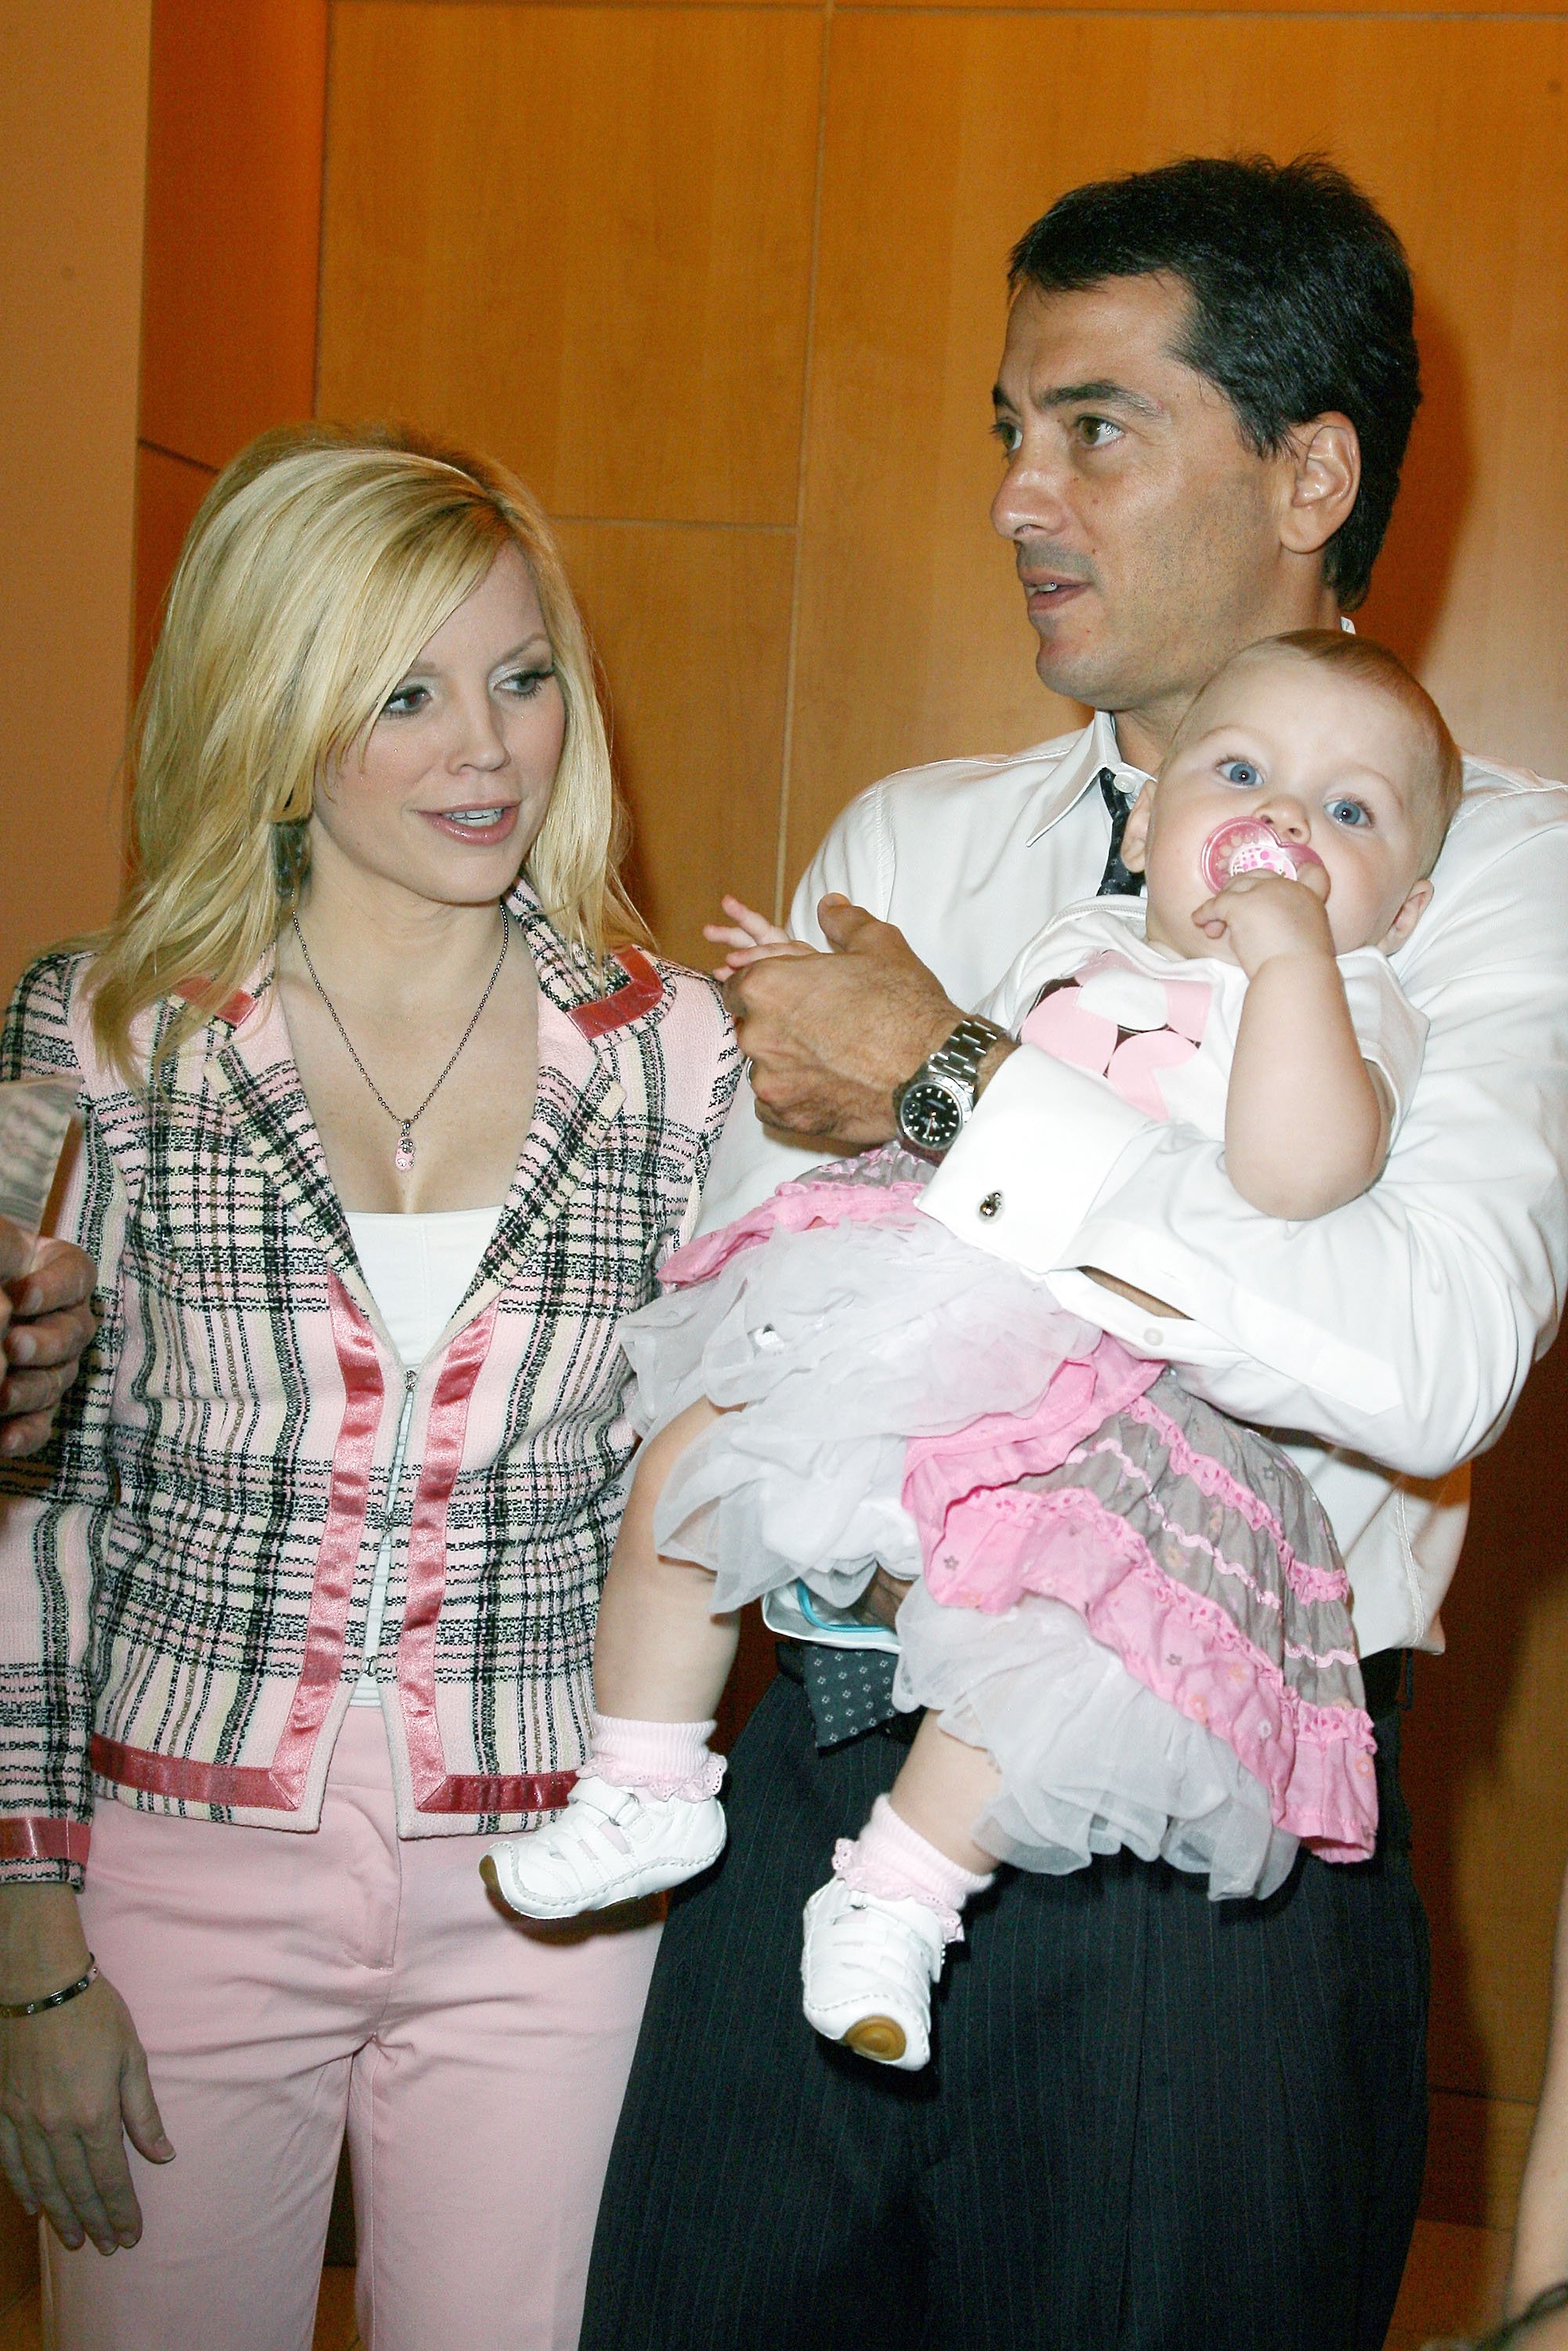 Scott Baio, his wife Renee Sloan, and daughter Bailey attend a press conference to promote Save Babies Through Screening Foundation at UCLA on September 5, 2008, in Westwood, California. | Source: Getty Images